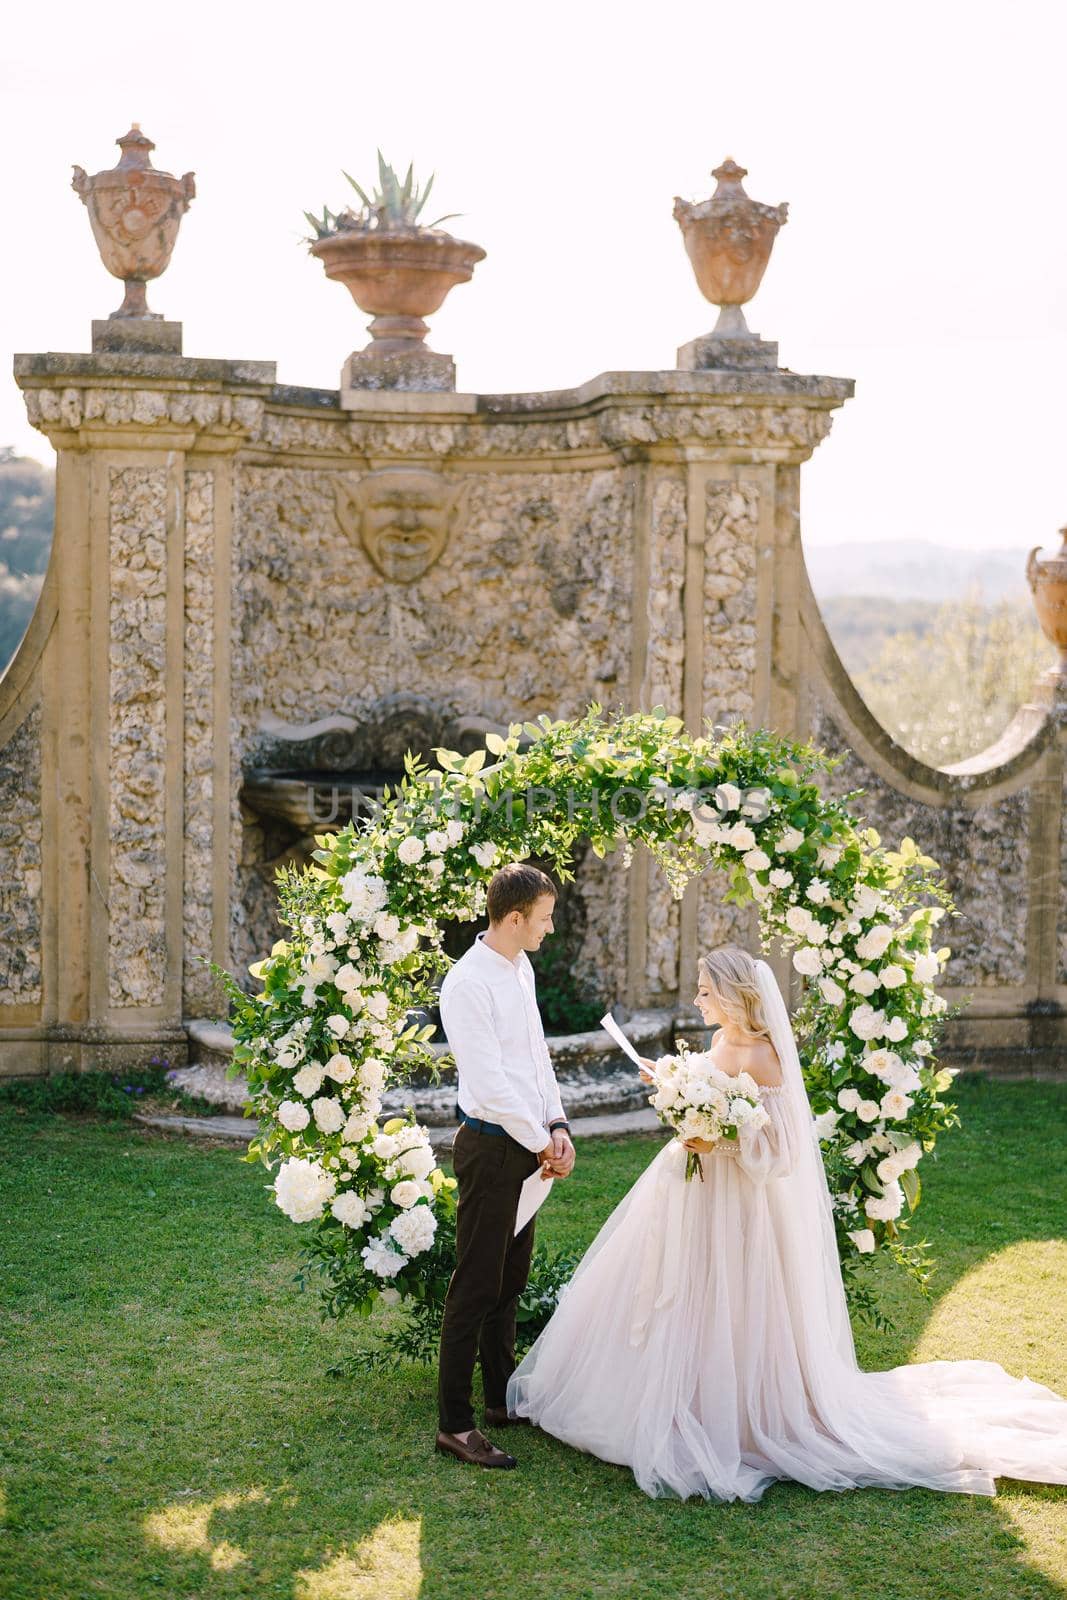 The bride reads wedding vows. Wedding at an old winery villa in Tuscany, Italy. Round wedding arch decorated with white flowers and greenery in front of an ancient Italian architecture. by Nadtochiy